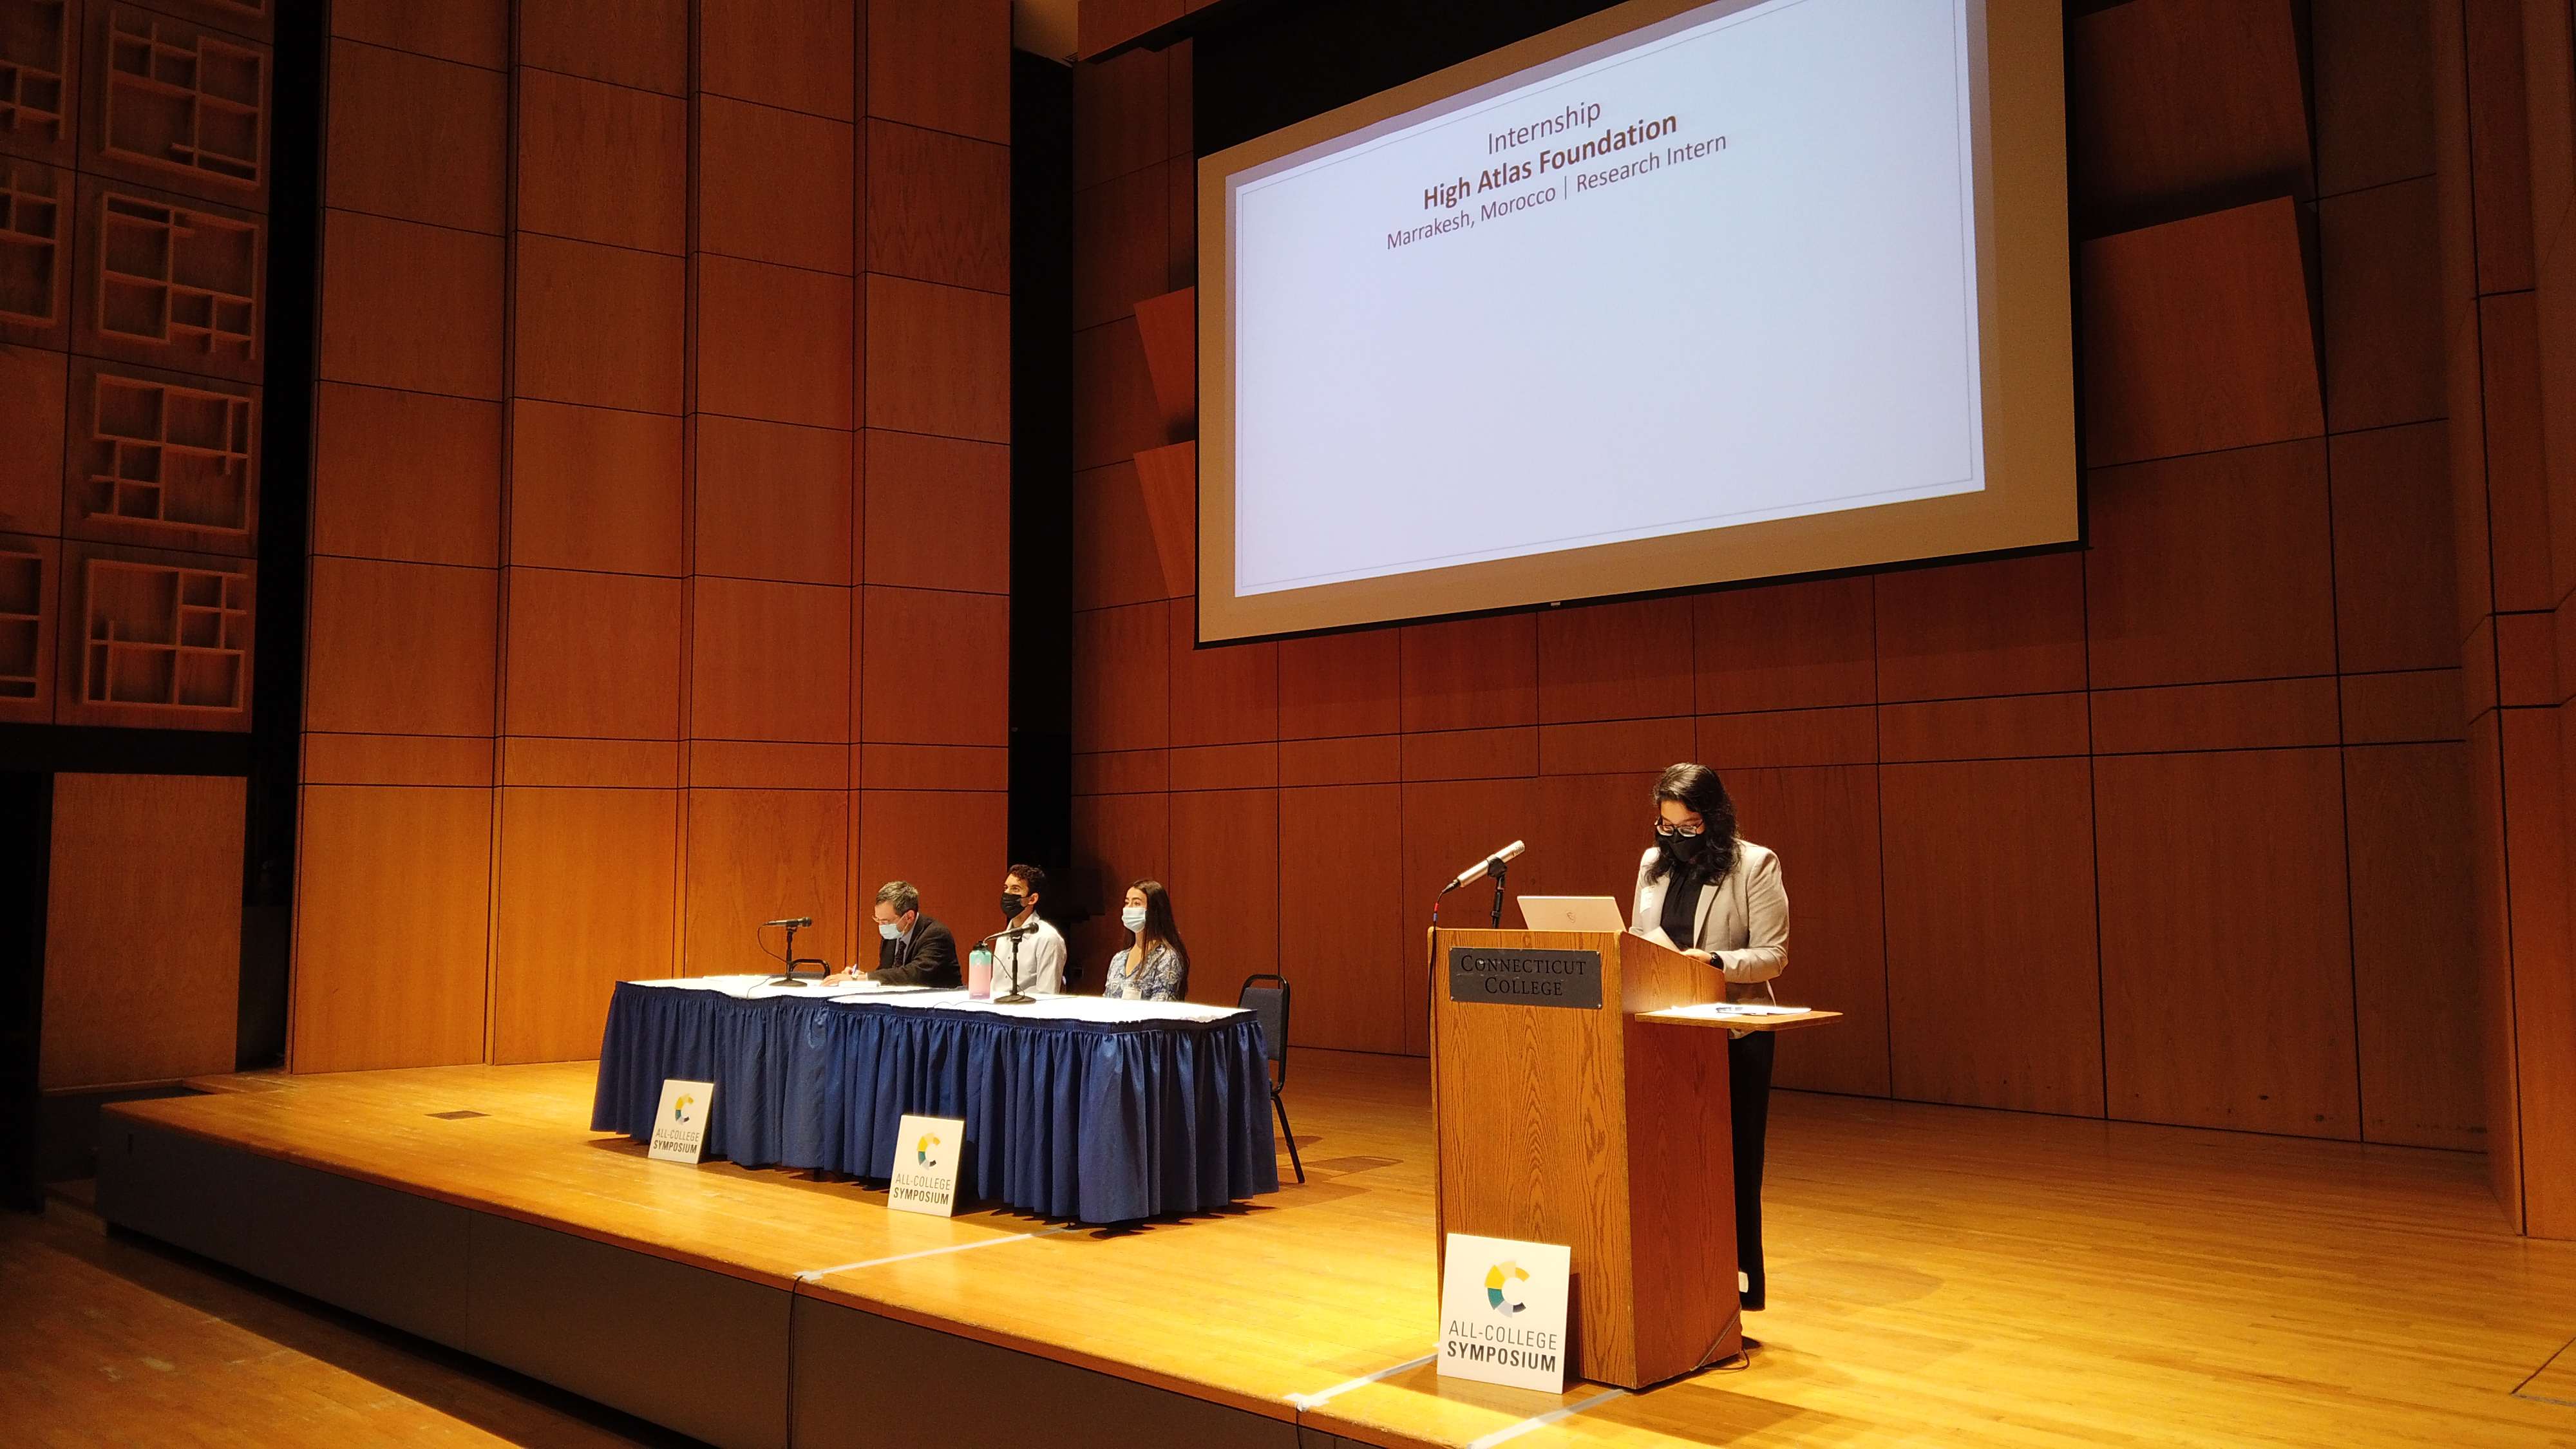 Samirah stands behind the podium in front of a projector to present her project at the All-College Symposium. A panel of students sits on the stage awaiting their turn.